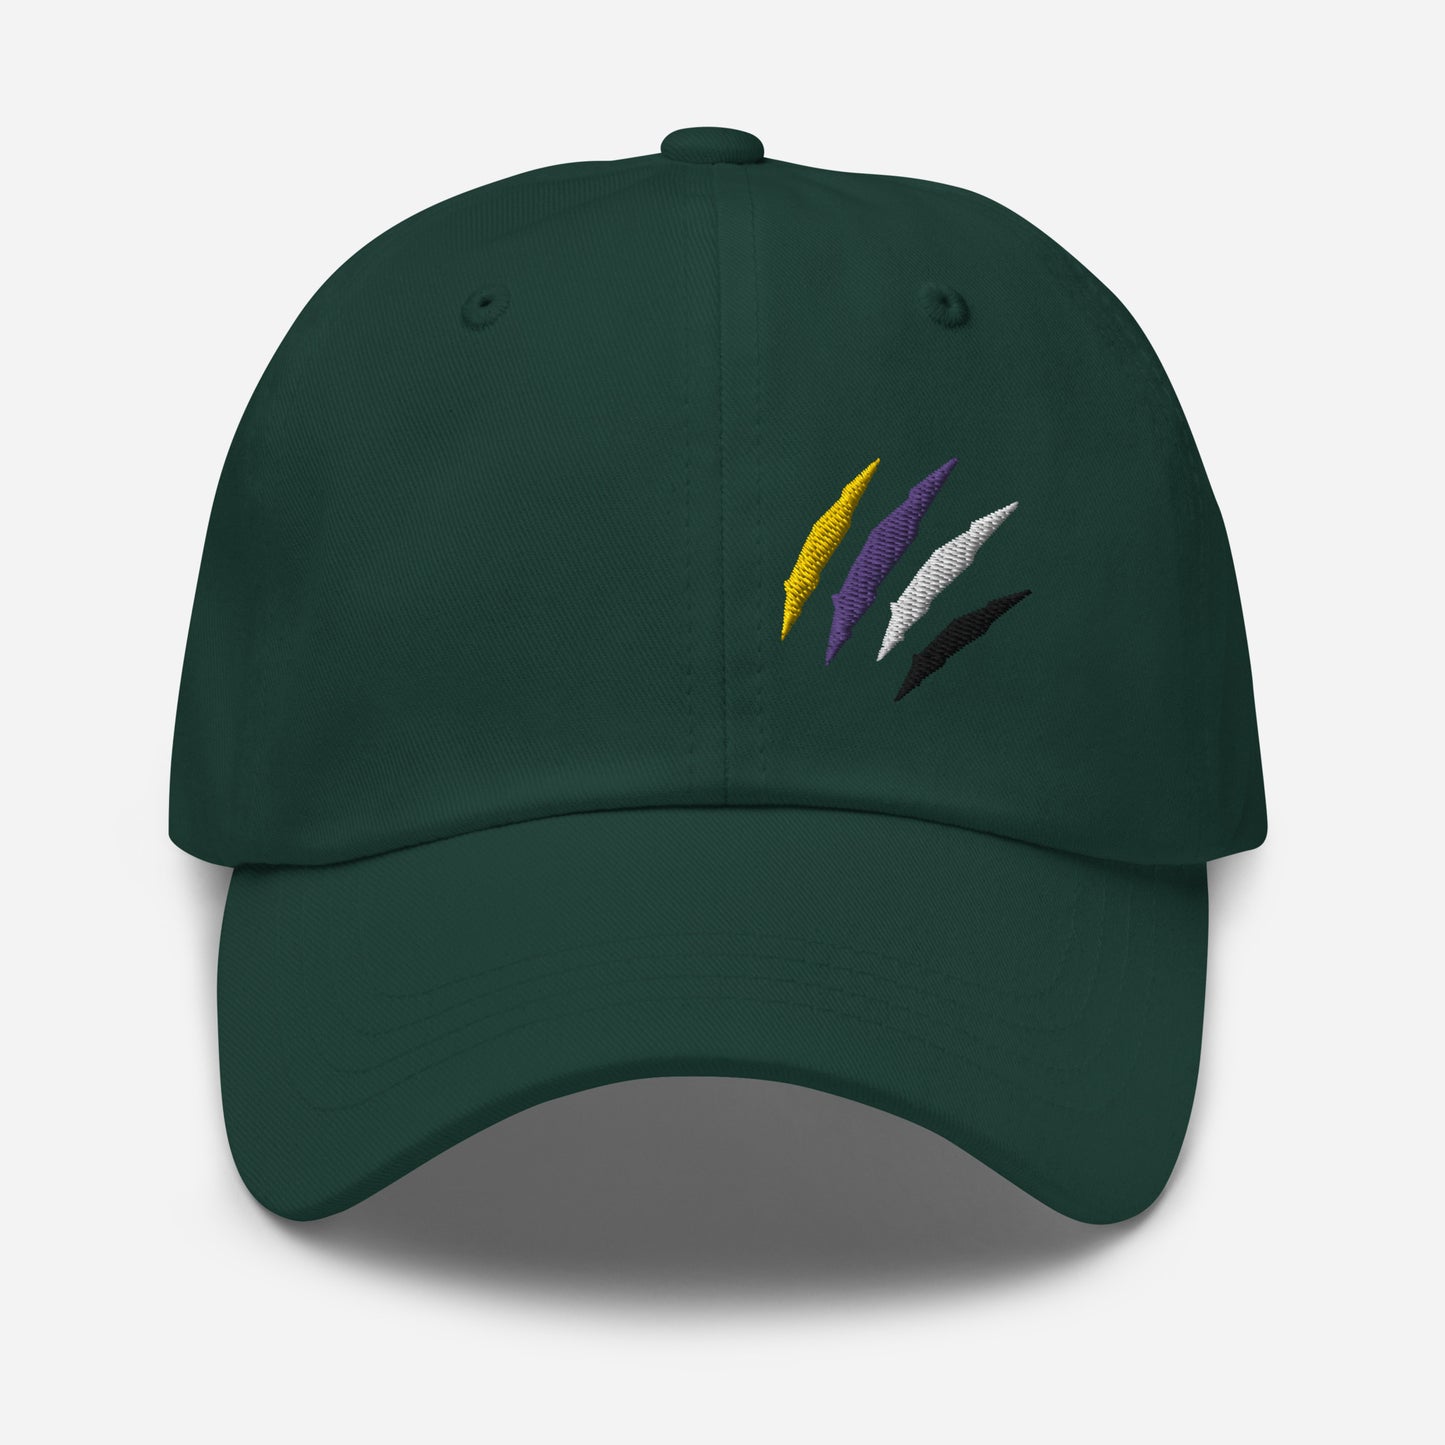 Spruce baseball hat featuring non-binary pride scratch mark embroidery with a low profile, adjustable strap.